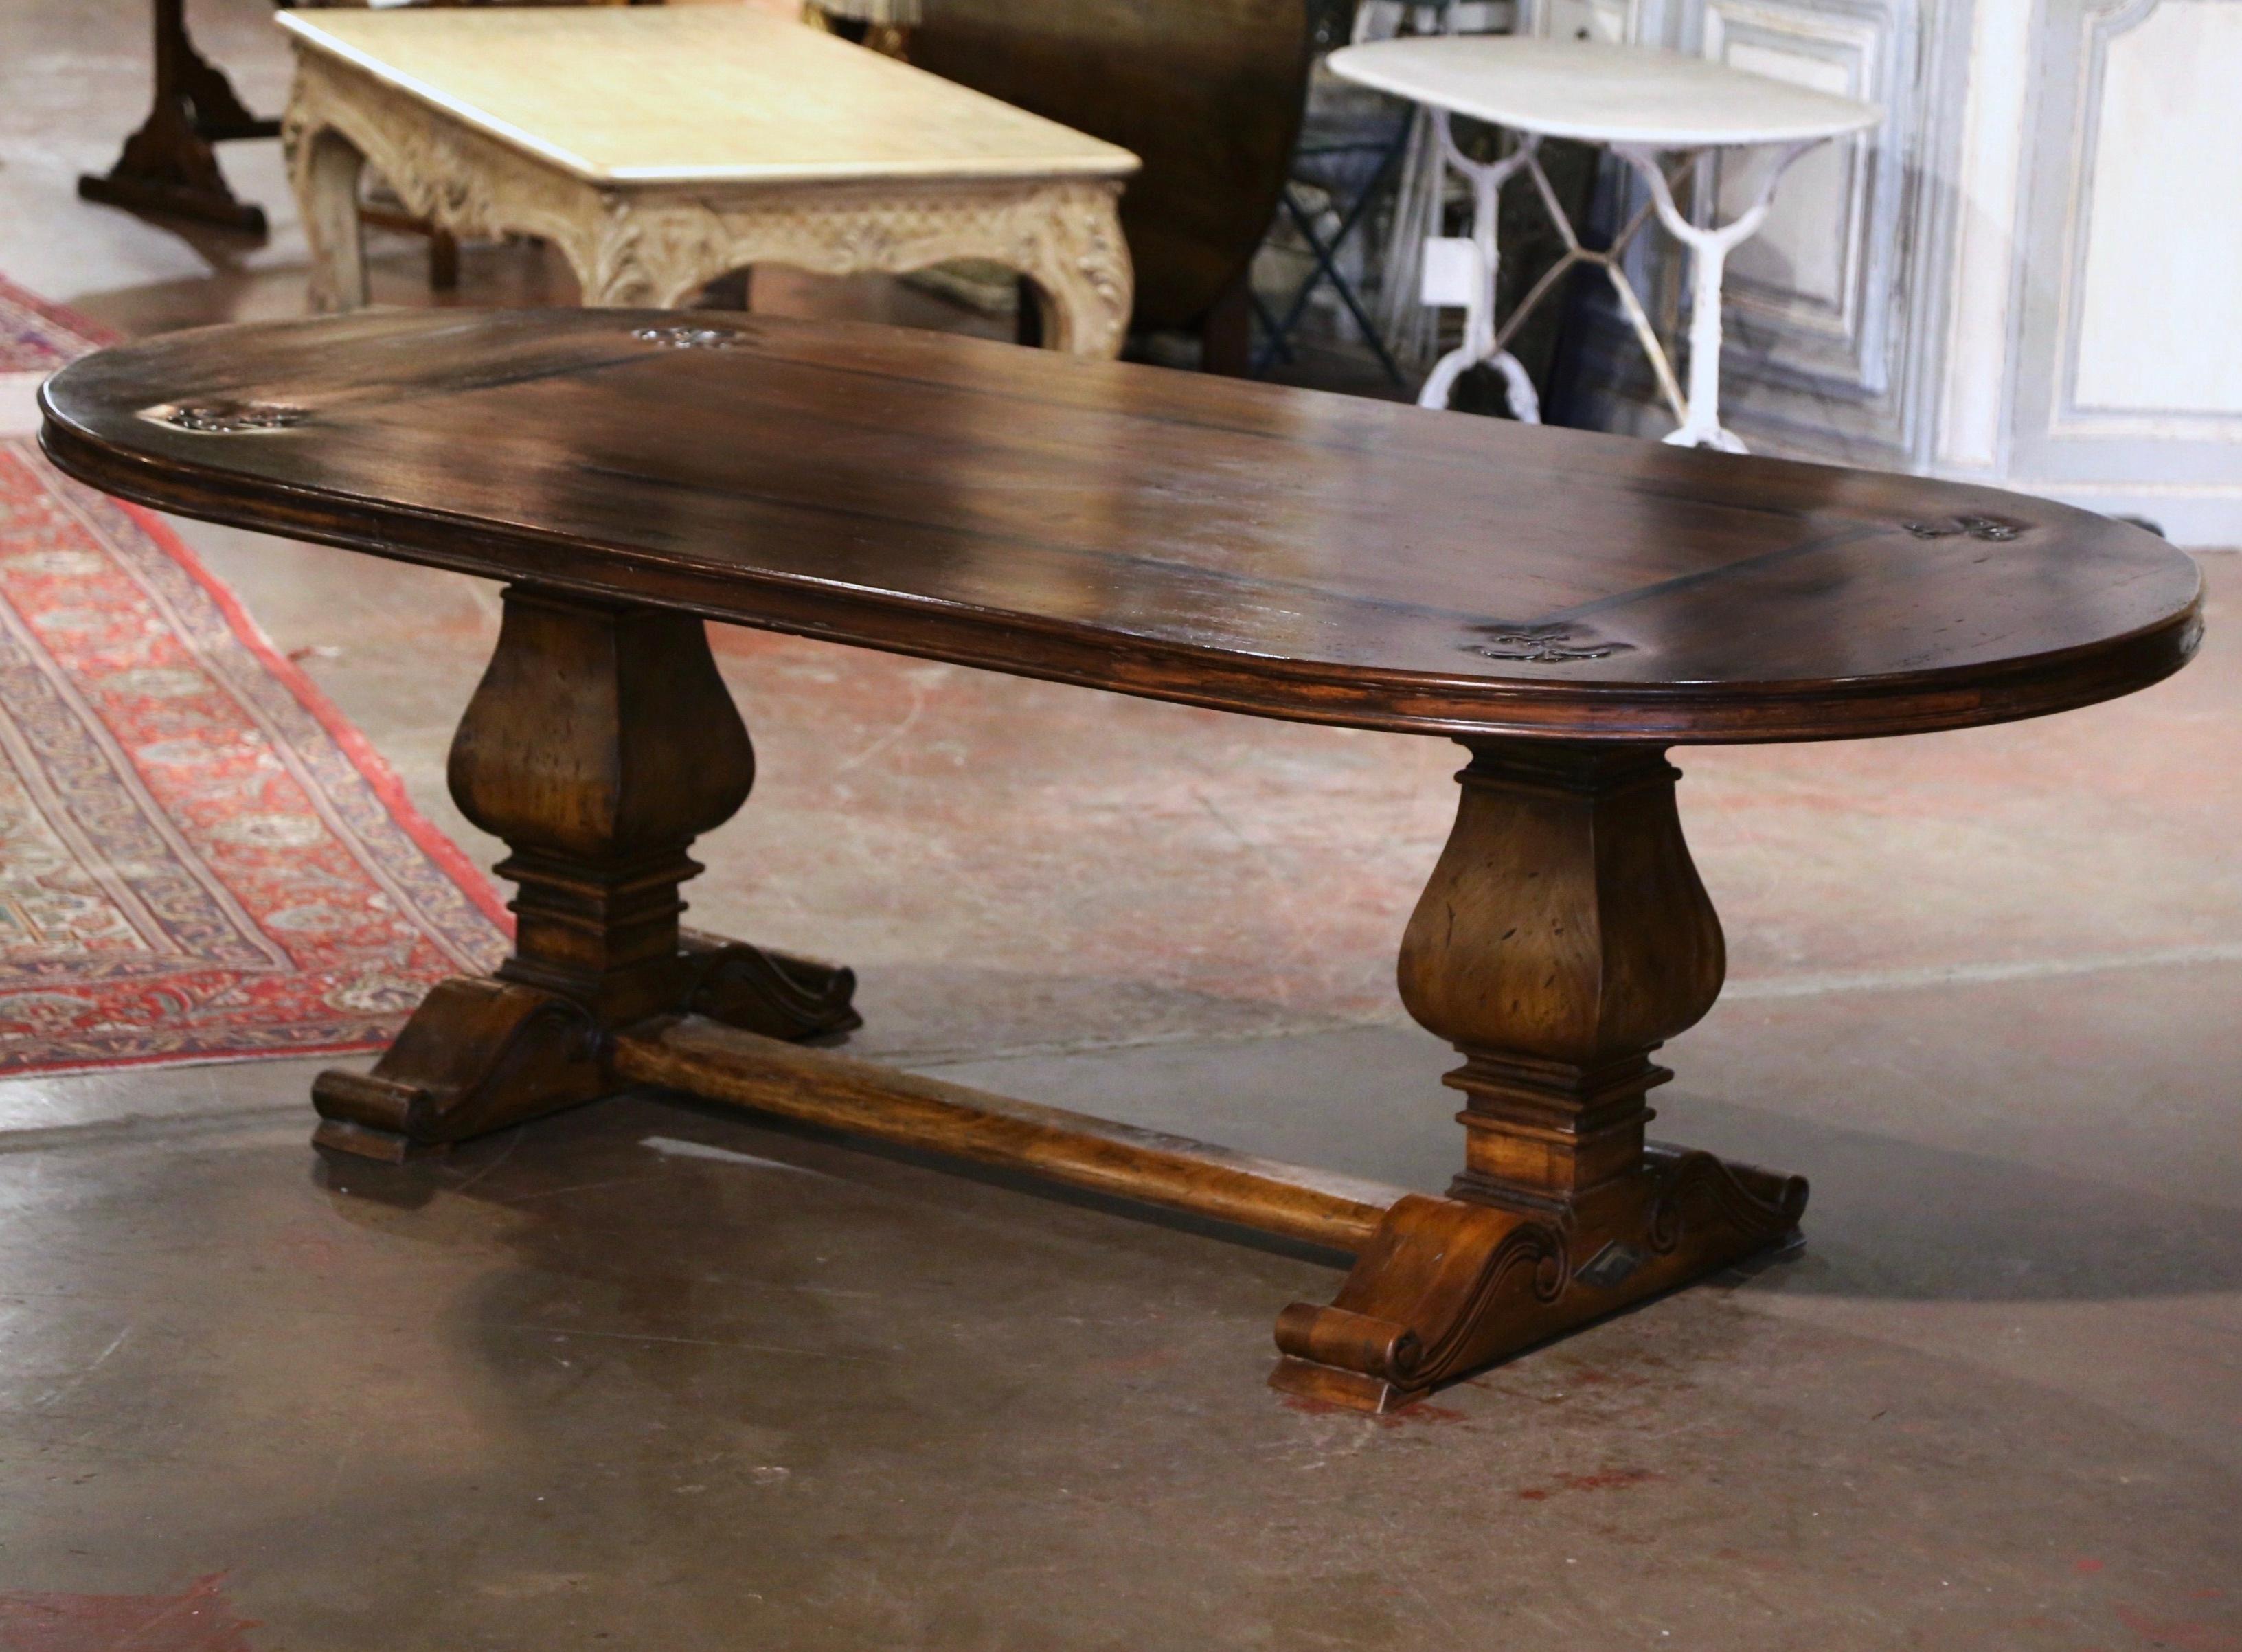 Patinated French Carved Walnut with Inlay Decor and Fleur-de-lys Trestle Dining Table For Sale